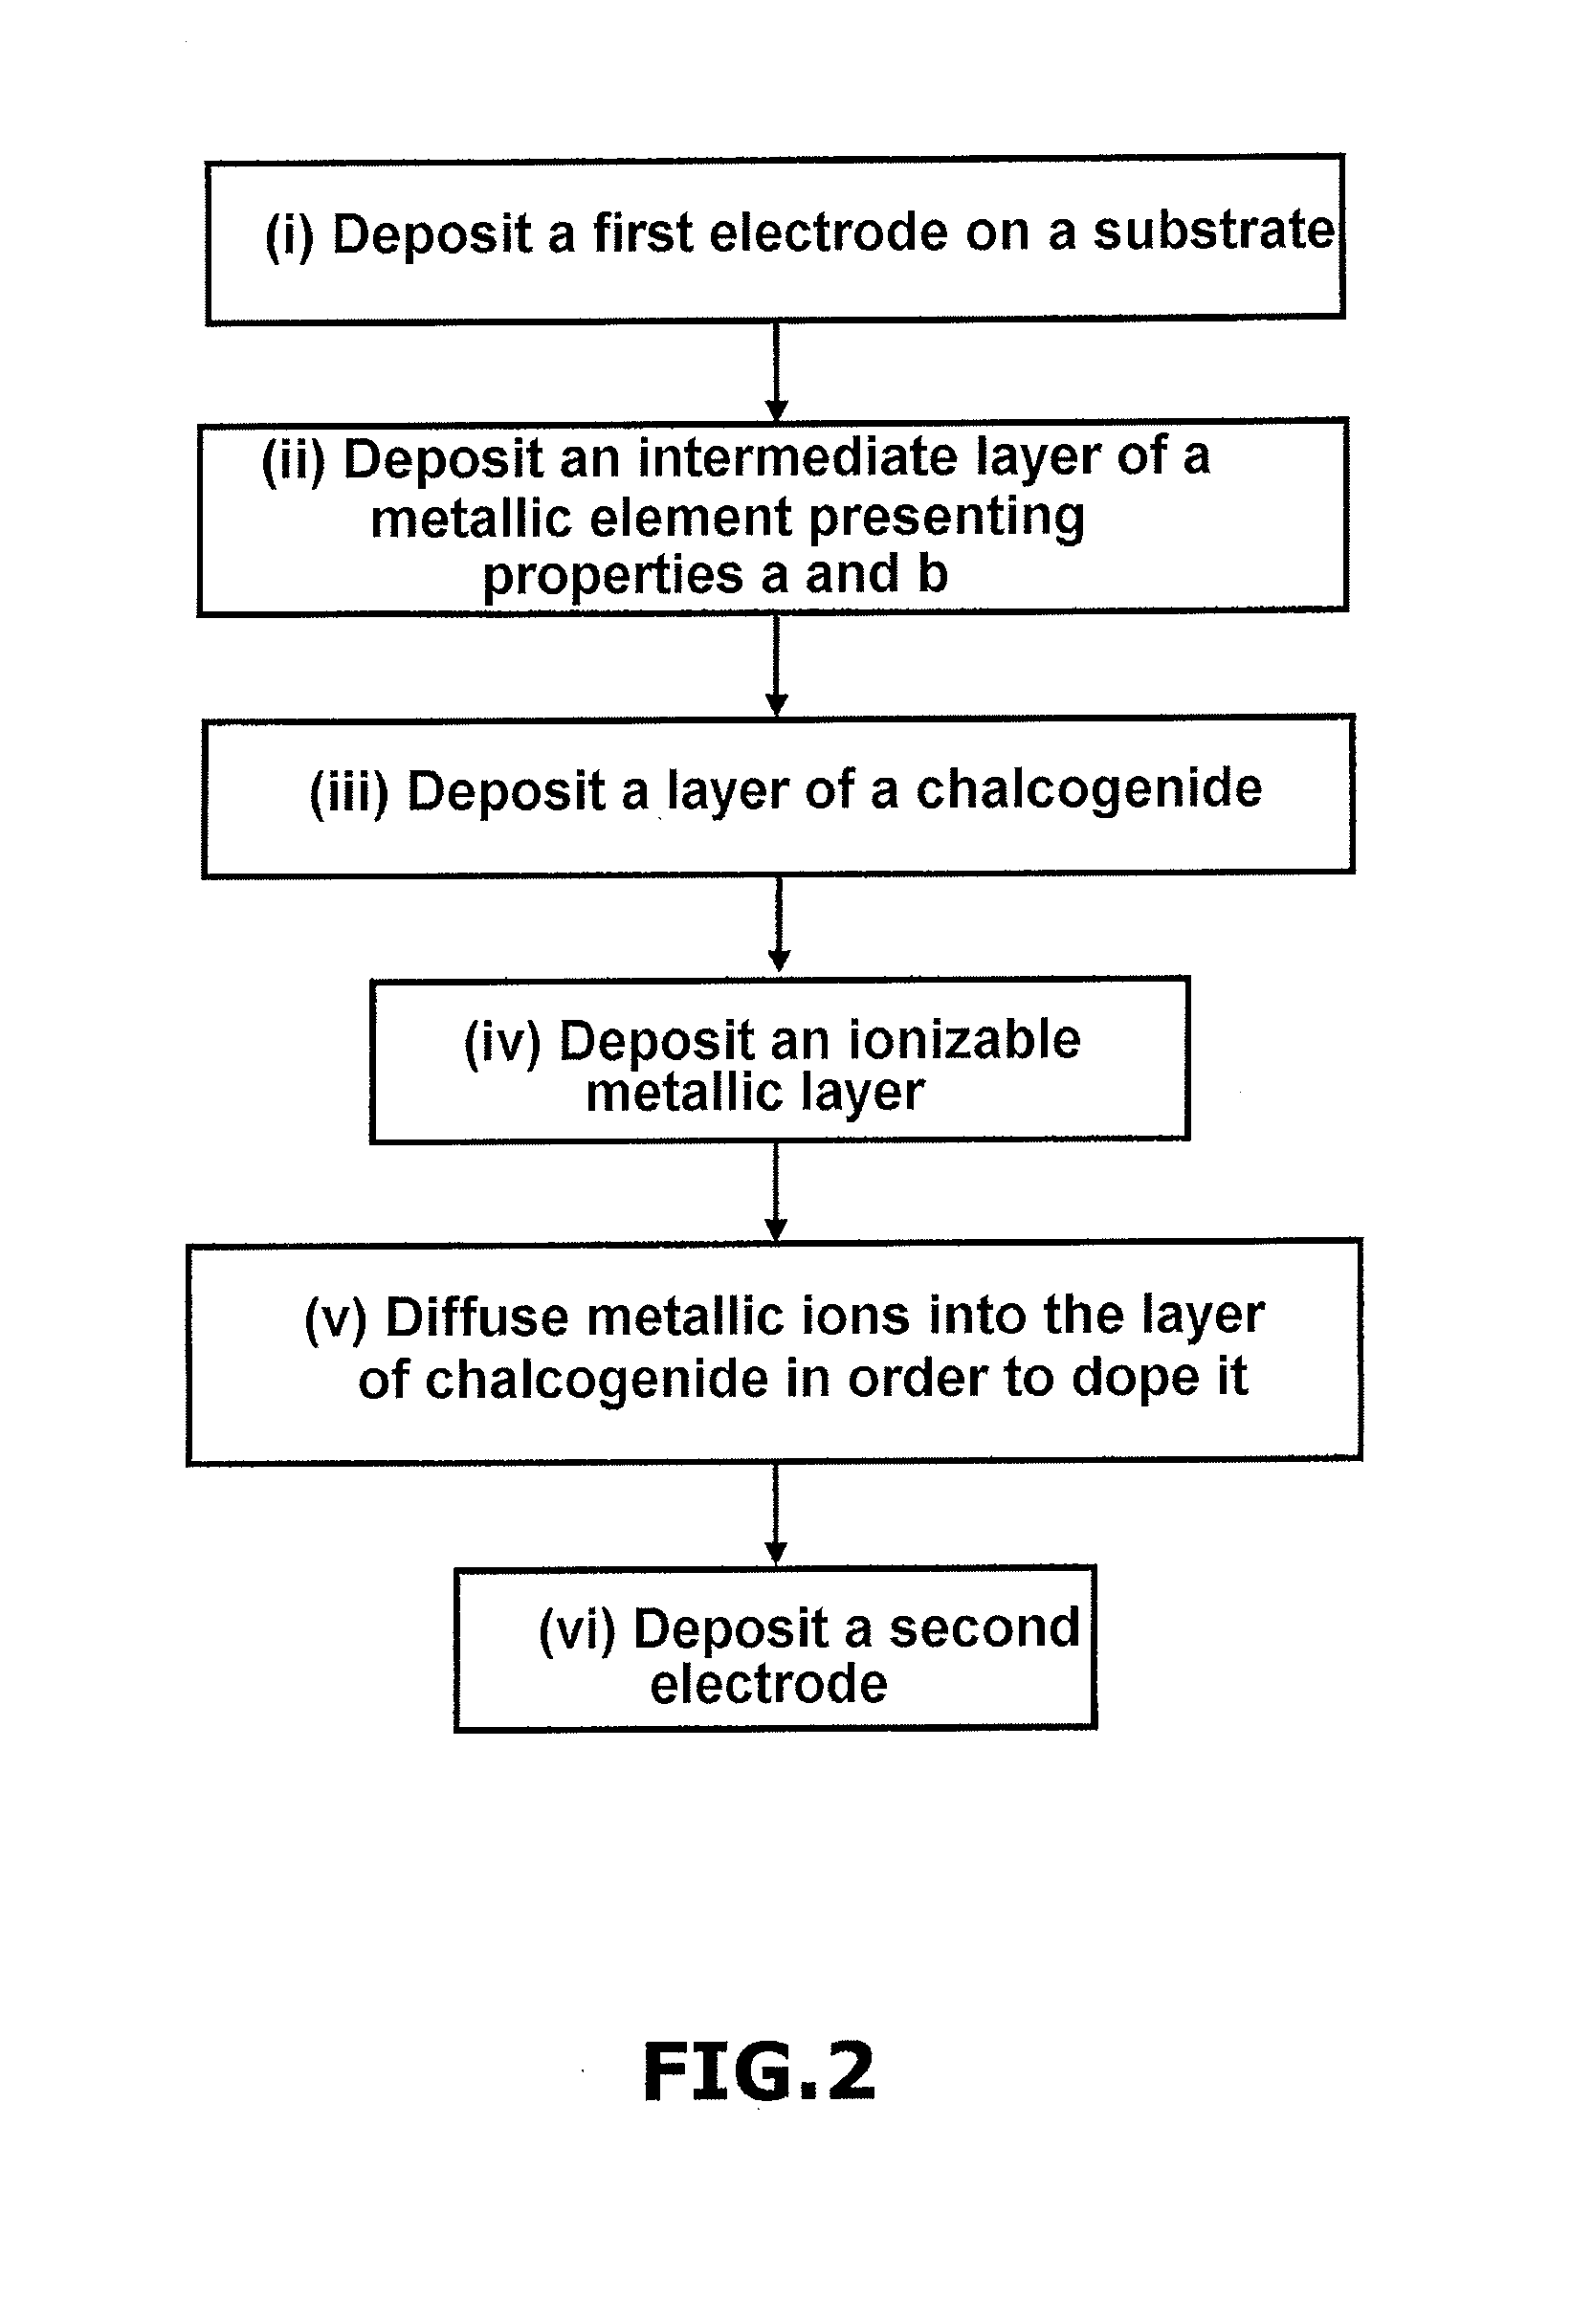 Microelectronic device with programmable memory, including a layer of doped chalcogenide that withstands high temperatures